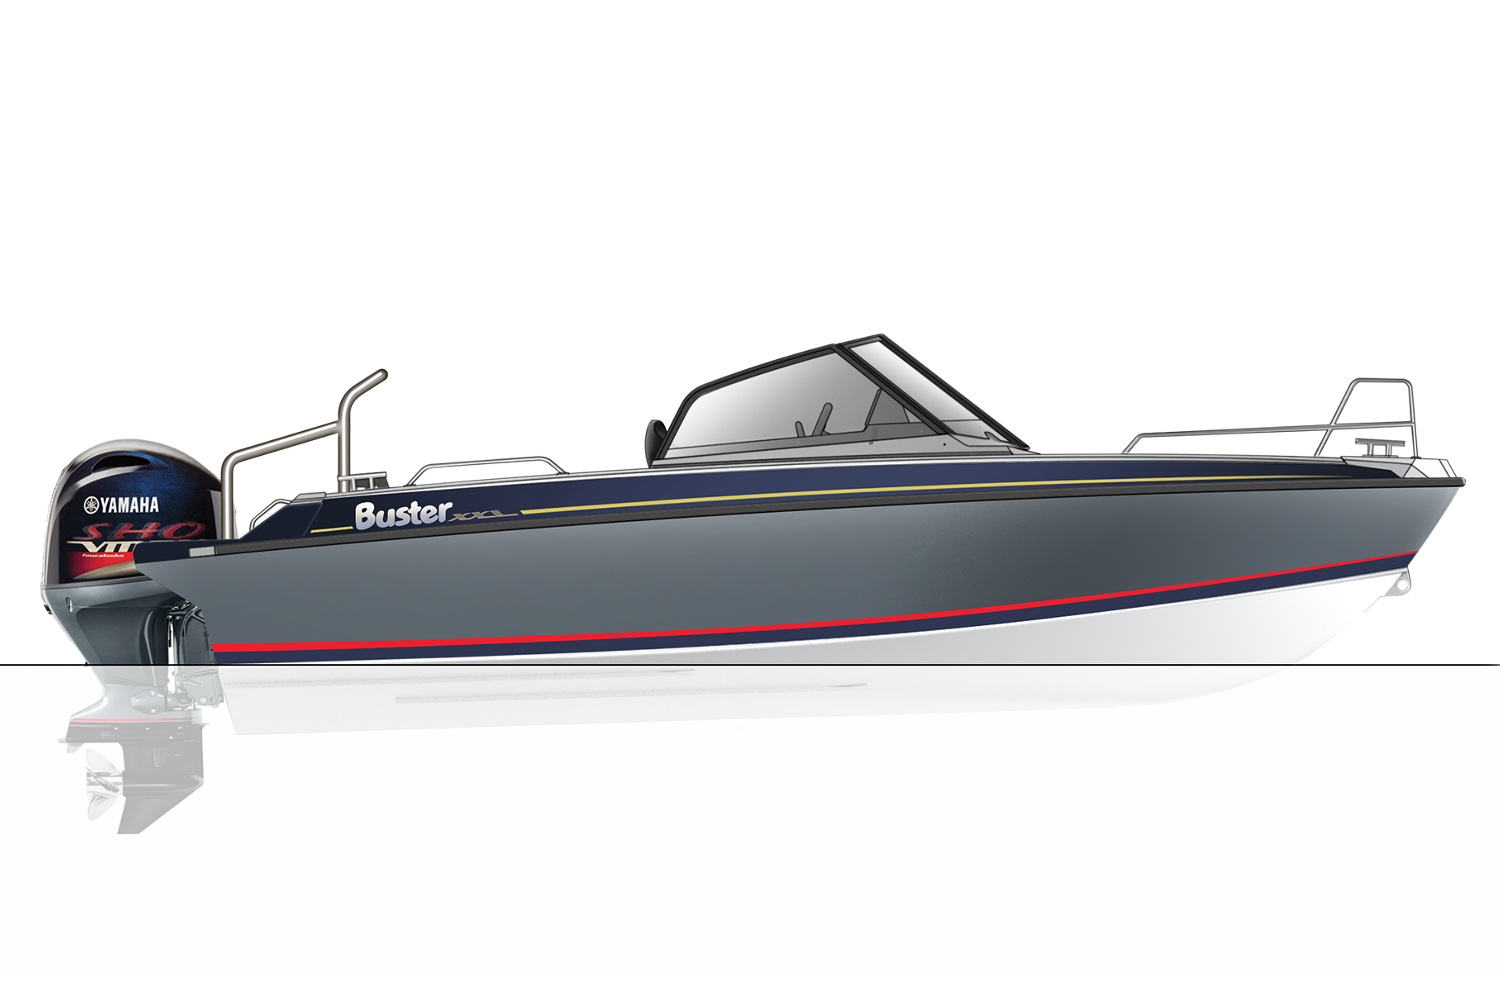 BUSTER XXL V MAX Special Edition, BUSTER XXL V MAX, BUSTER XXL VMAX Special Edition, BUSTER XXL VMAX, Алюминиевая лодка Buster, Алюминиевая лодка Buster XXL V MAX, Aluminium boat BUSTER XXL V MAX, Алюминиевая лодка Buster XXL V MAX, Алюминиевый катер BUSTER XXL V MAX, Алюмінієвий човен Buster XXL V MAX, Алюмінієвий катер BUSTER XXL V MAX, Aluminium boat BUSTER XXL V MAX